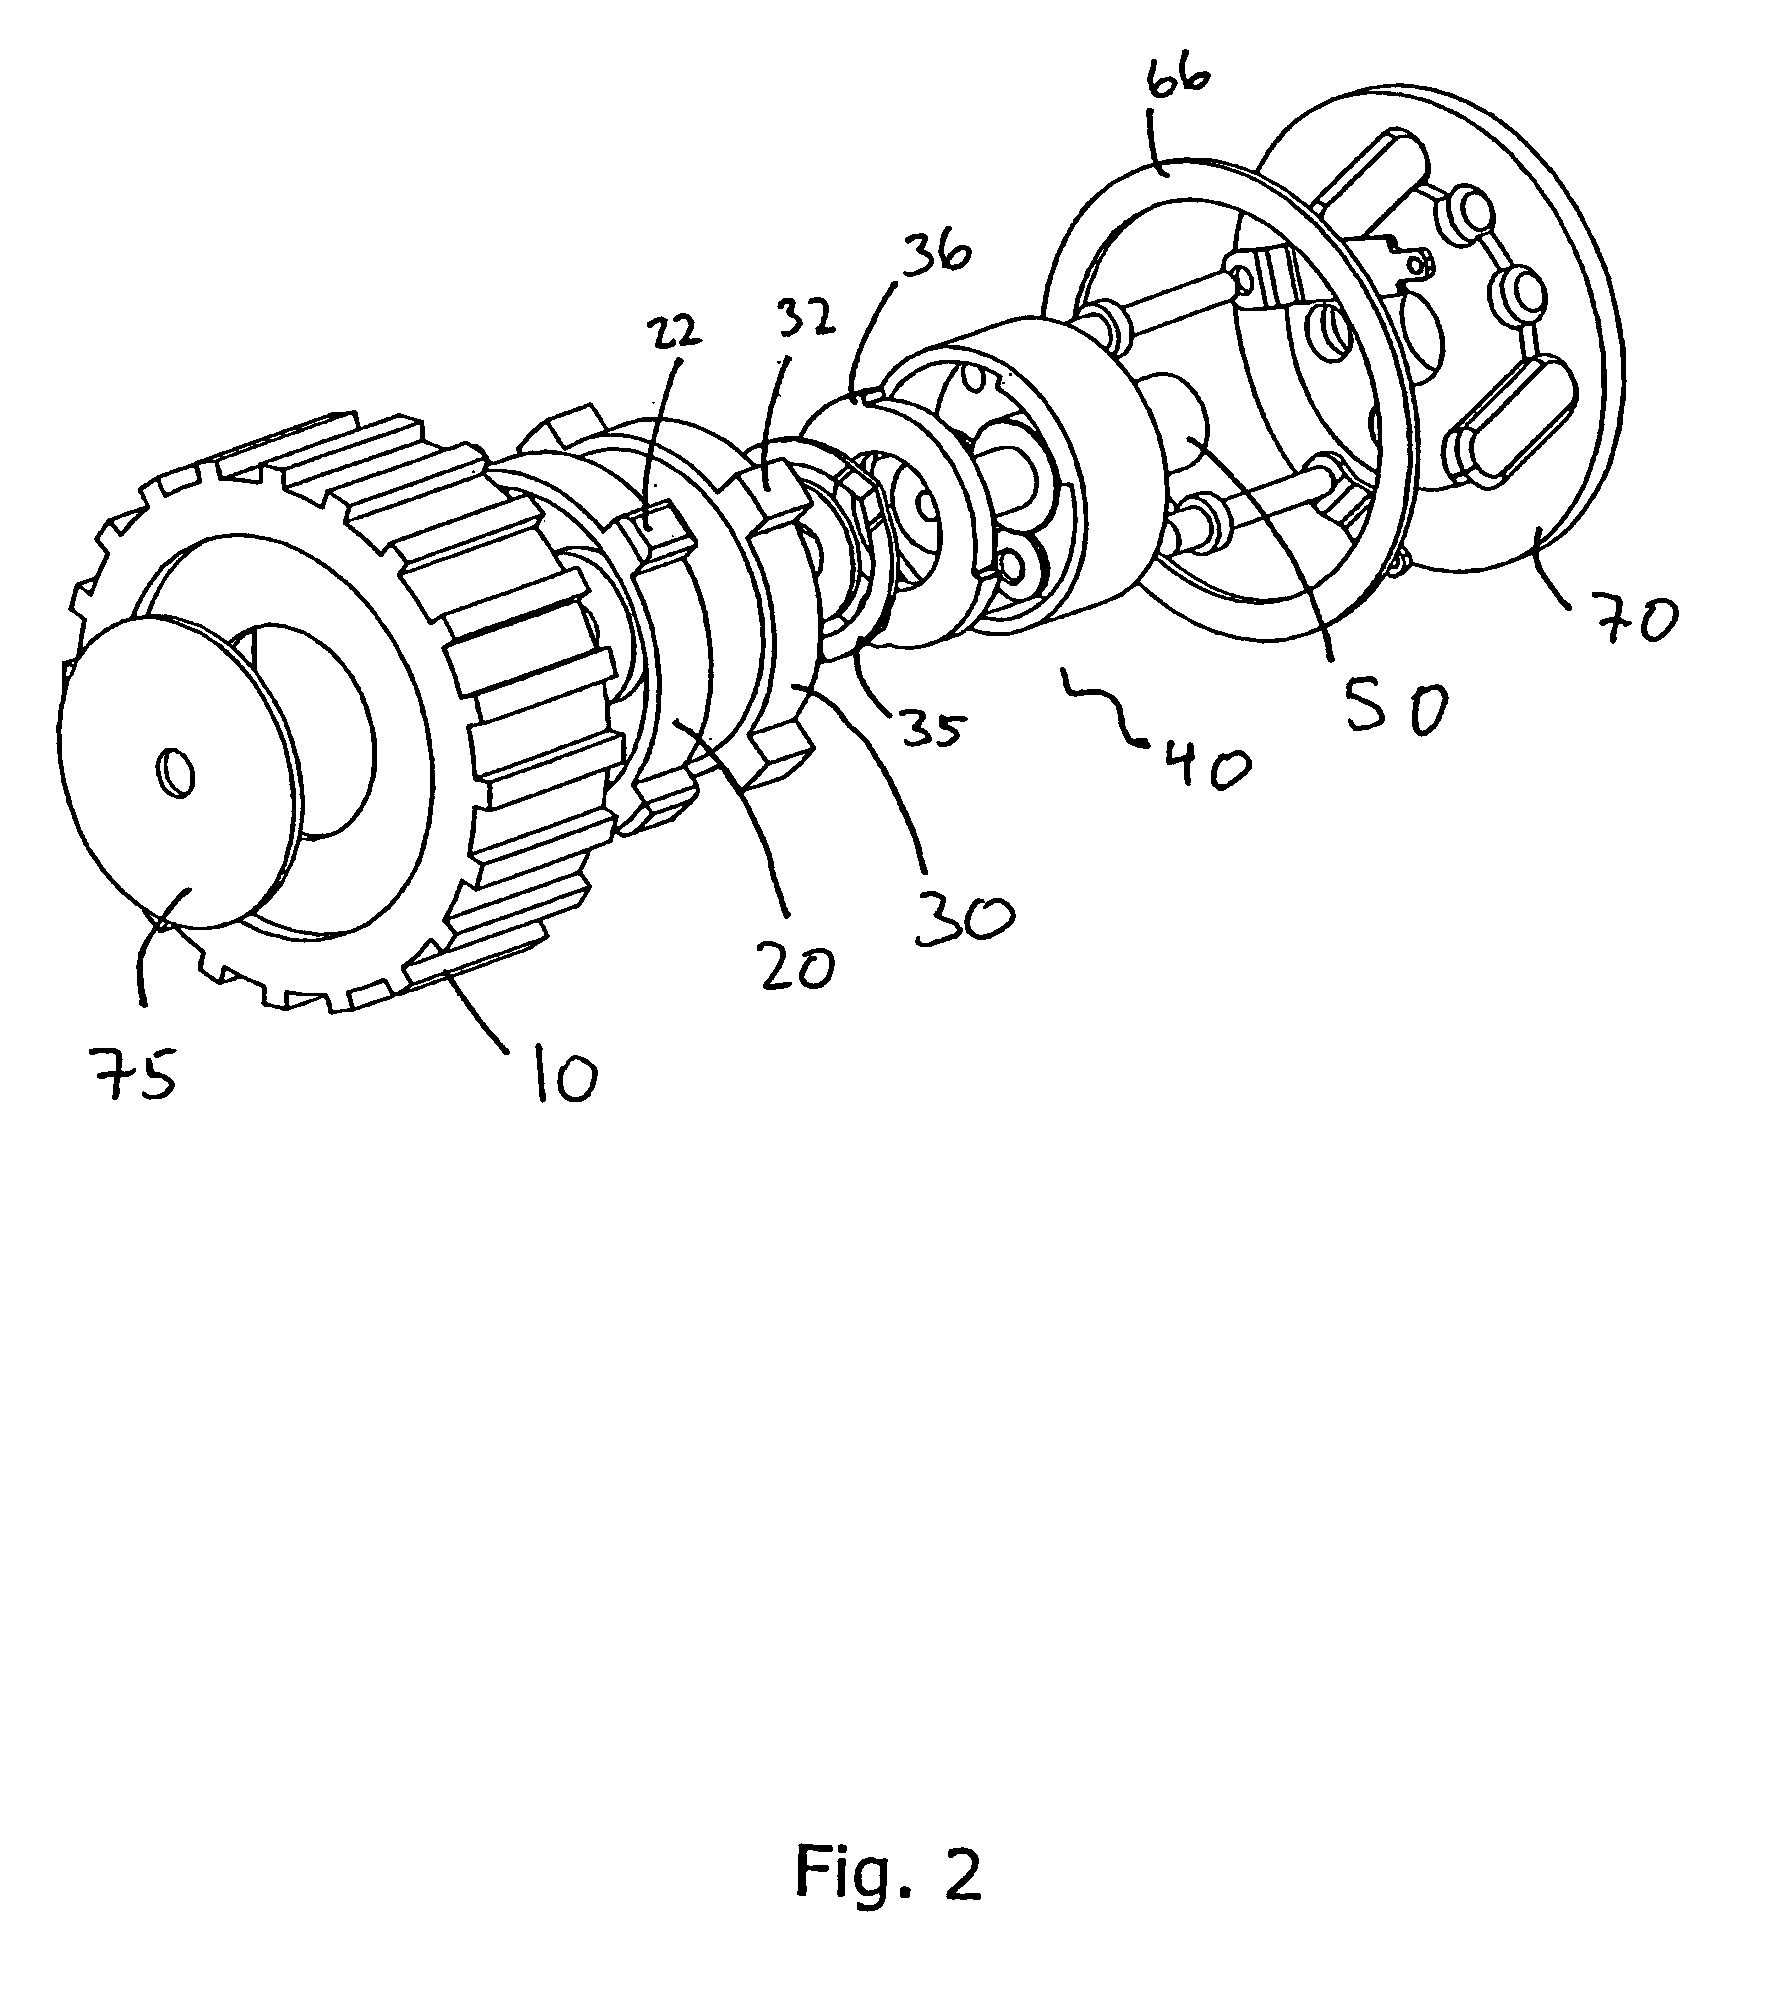 Combined roller and push switch assembly